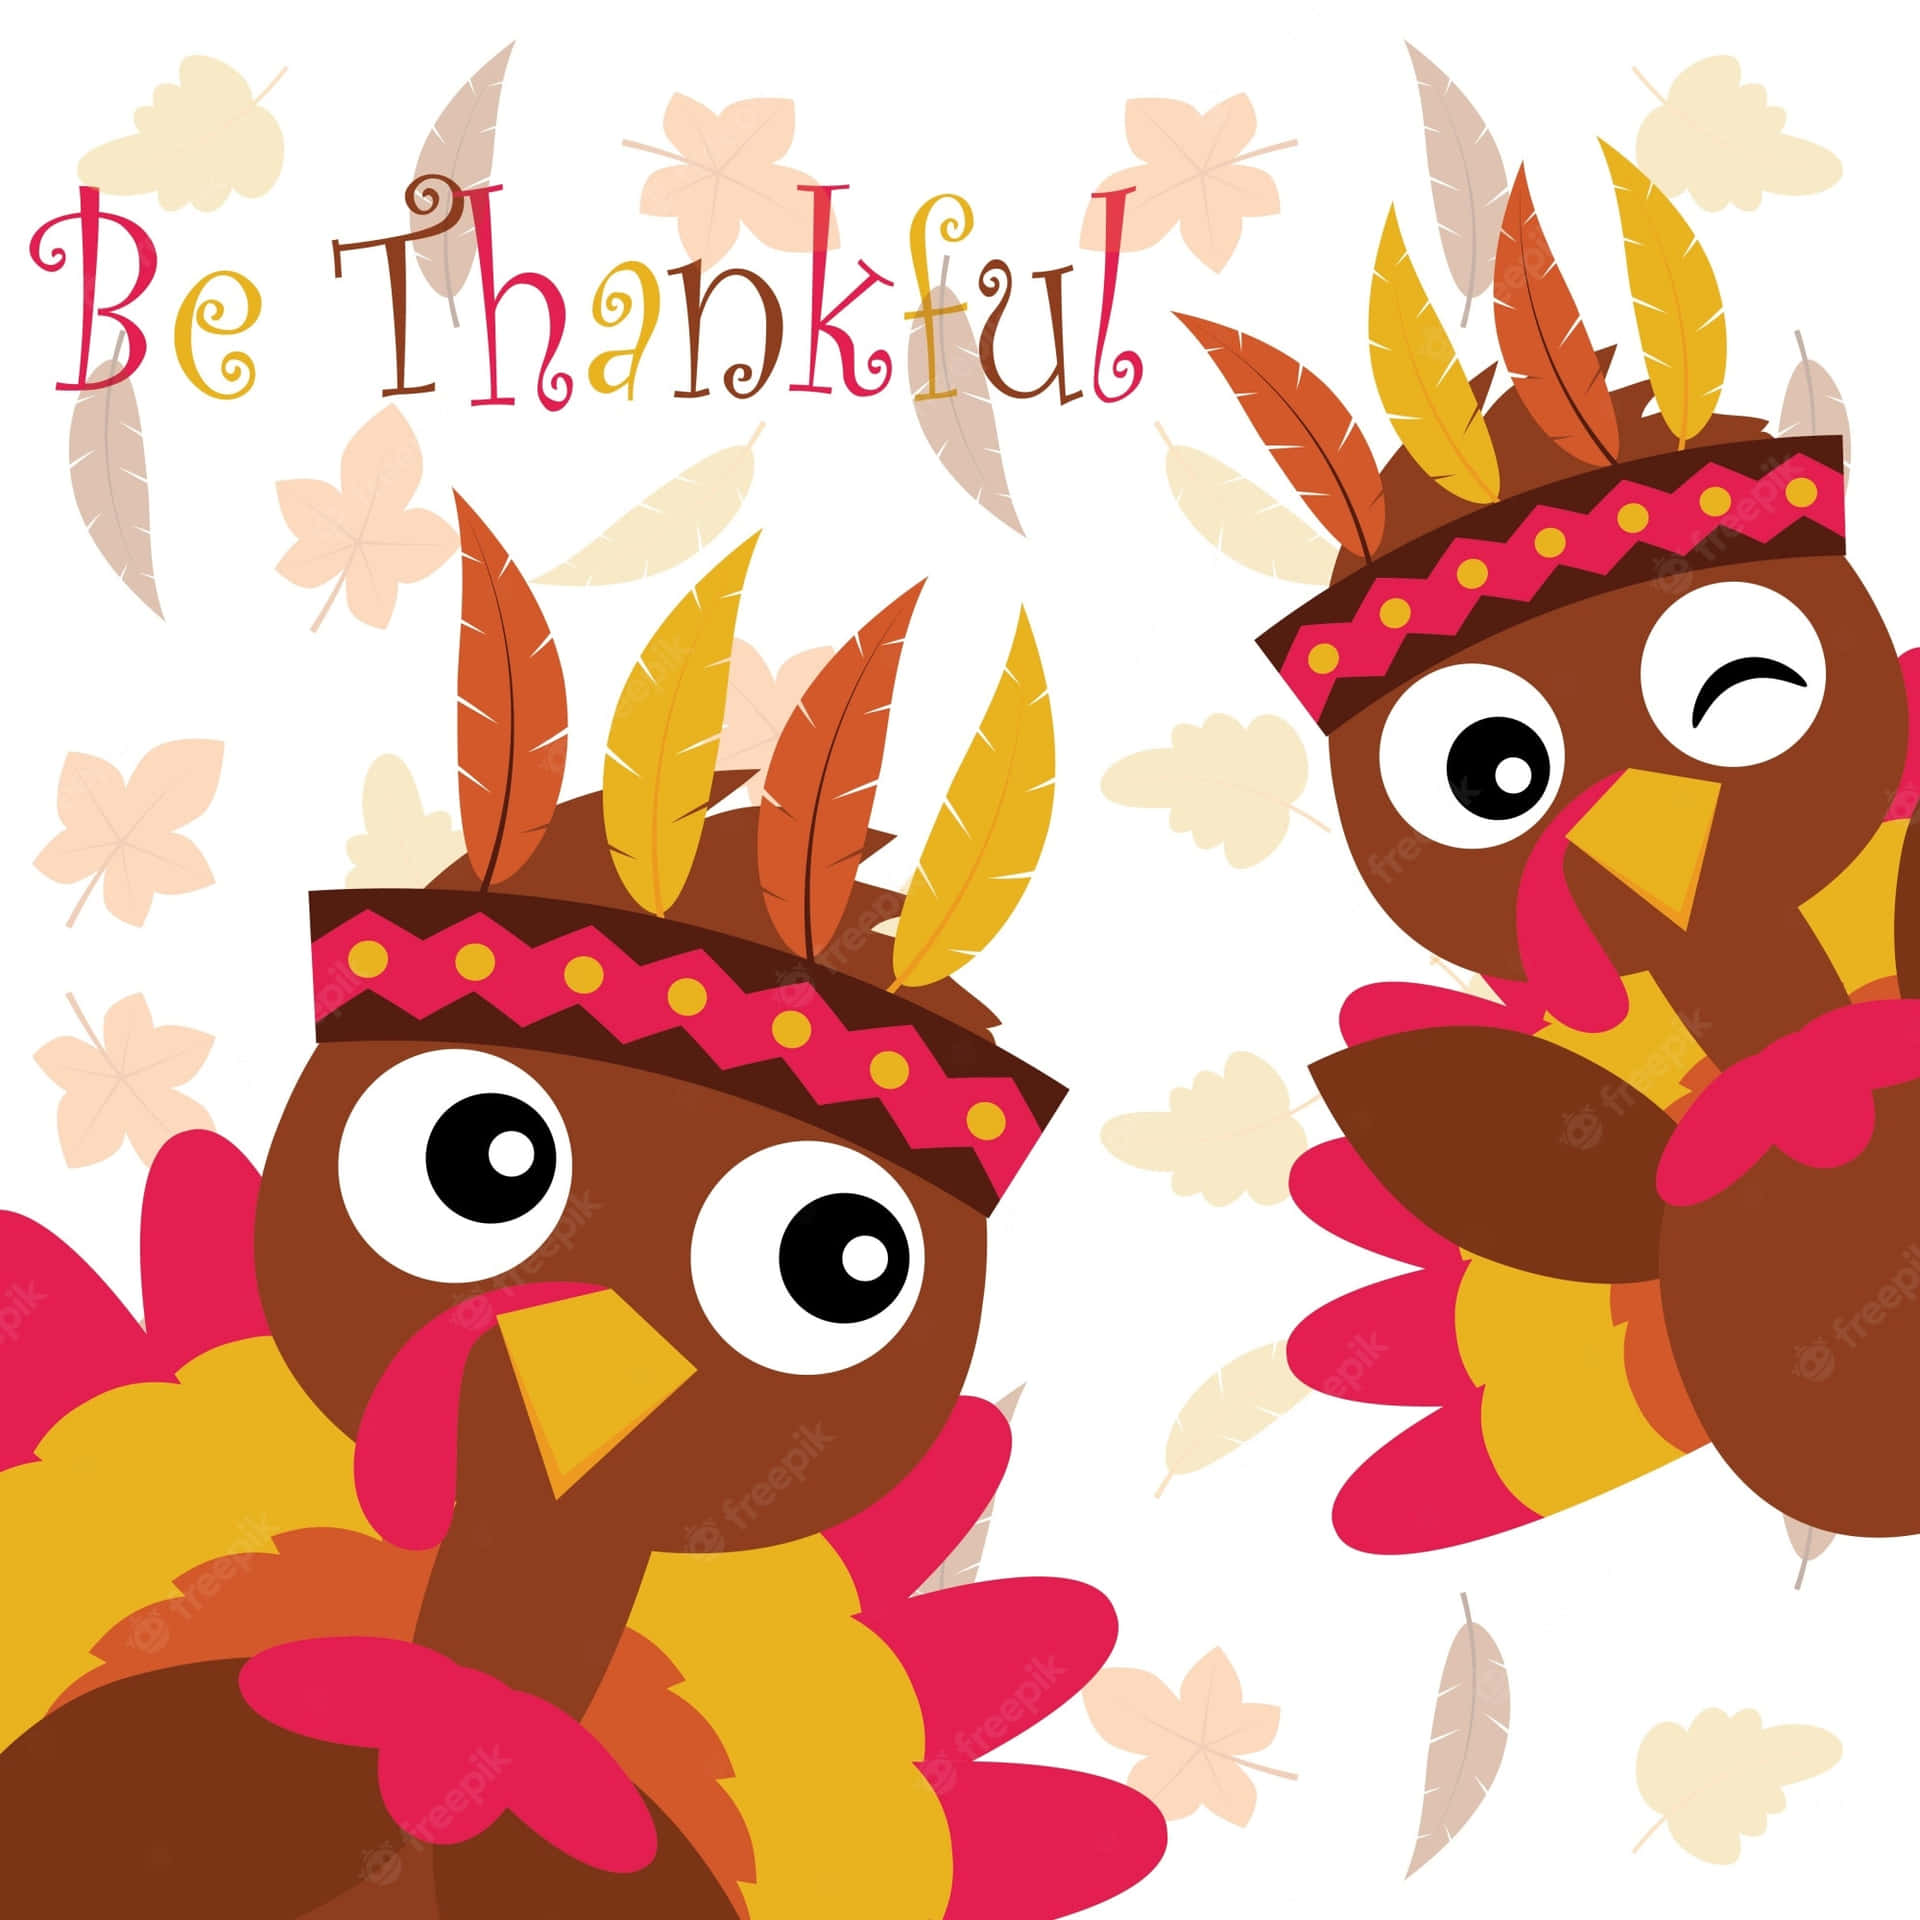 A happy family of turkeys gather to give thanks for Thanksgiving. Wallpaper